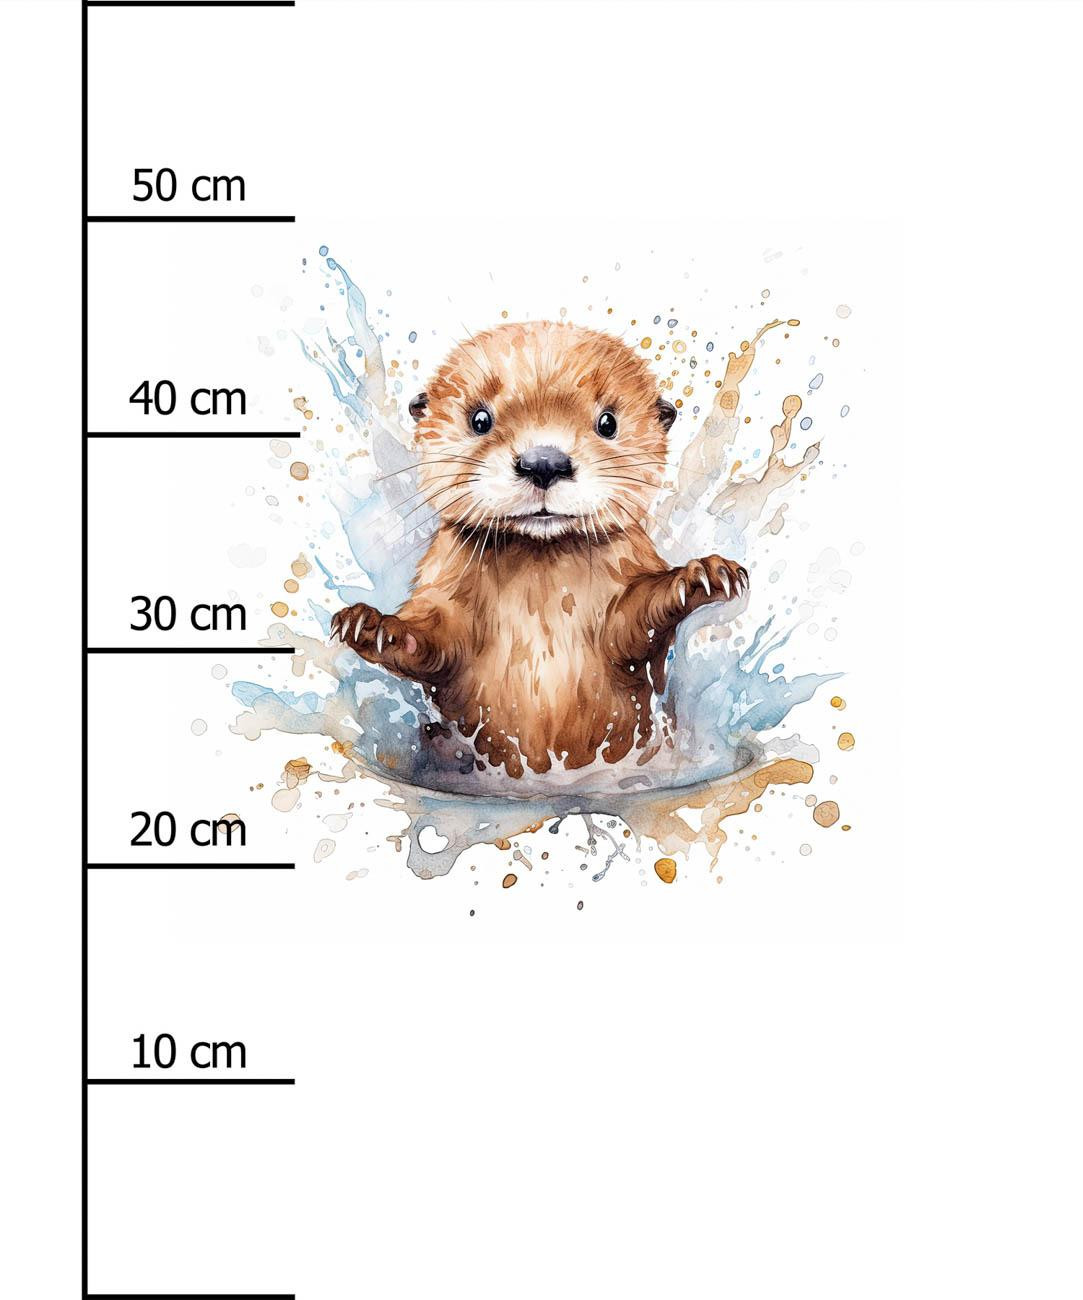 WATERCOLOR BABY OTTER - panel (60cm x 50cm) looped knit